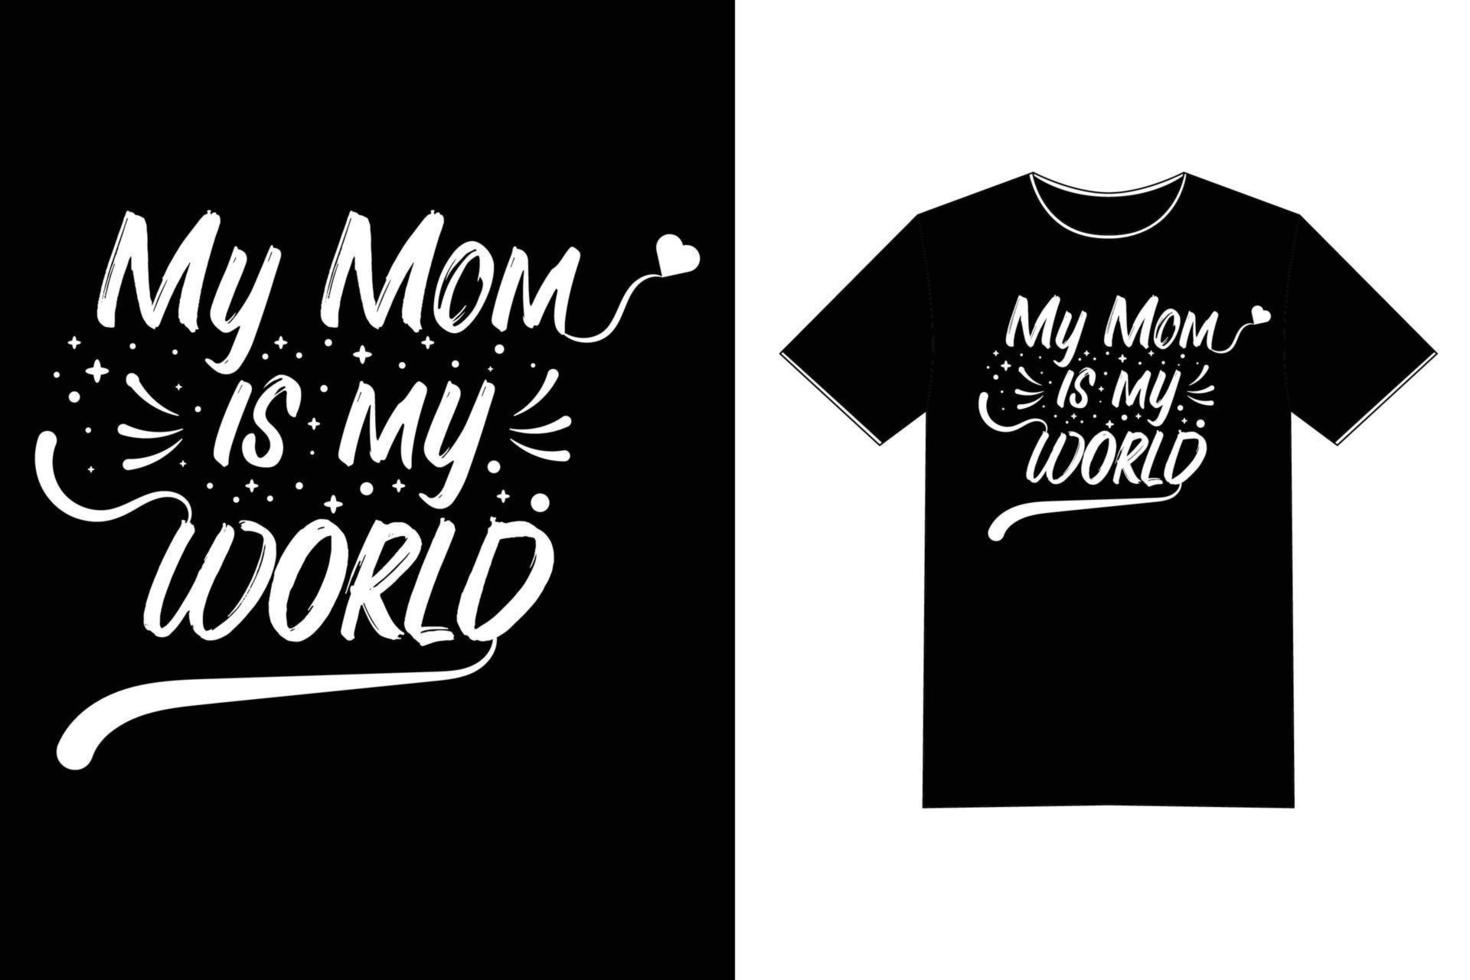 My Mom is my World - Motivational Quote Saying Tshirt Design vector